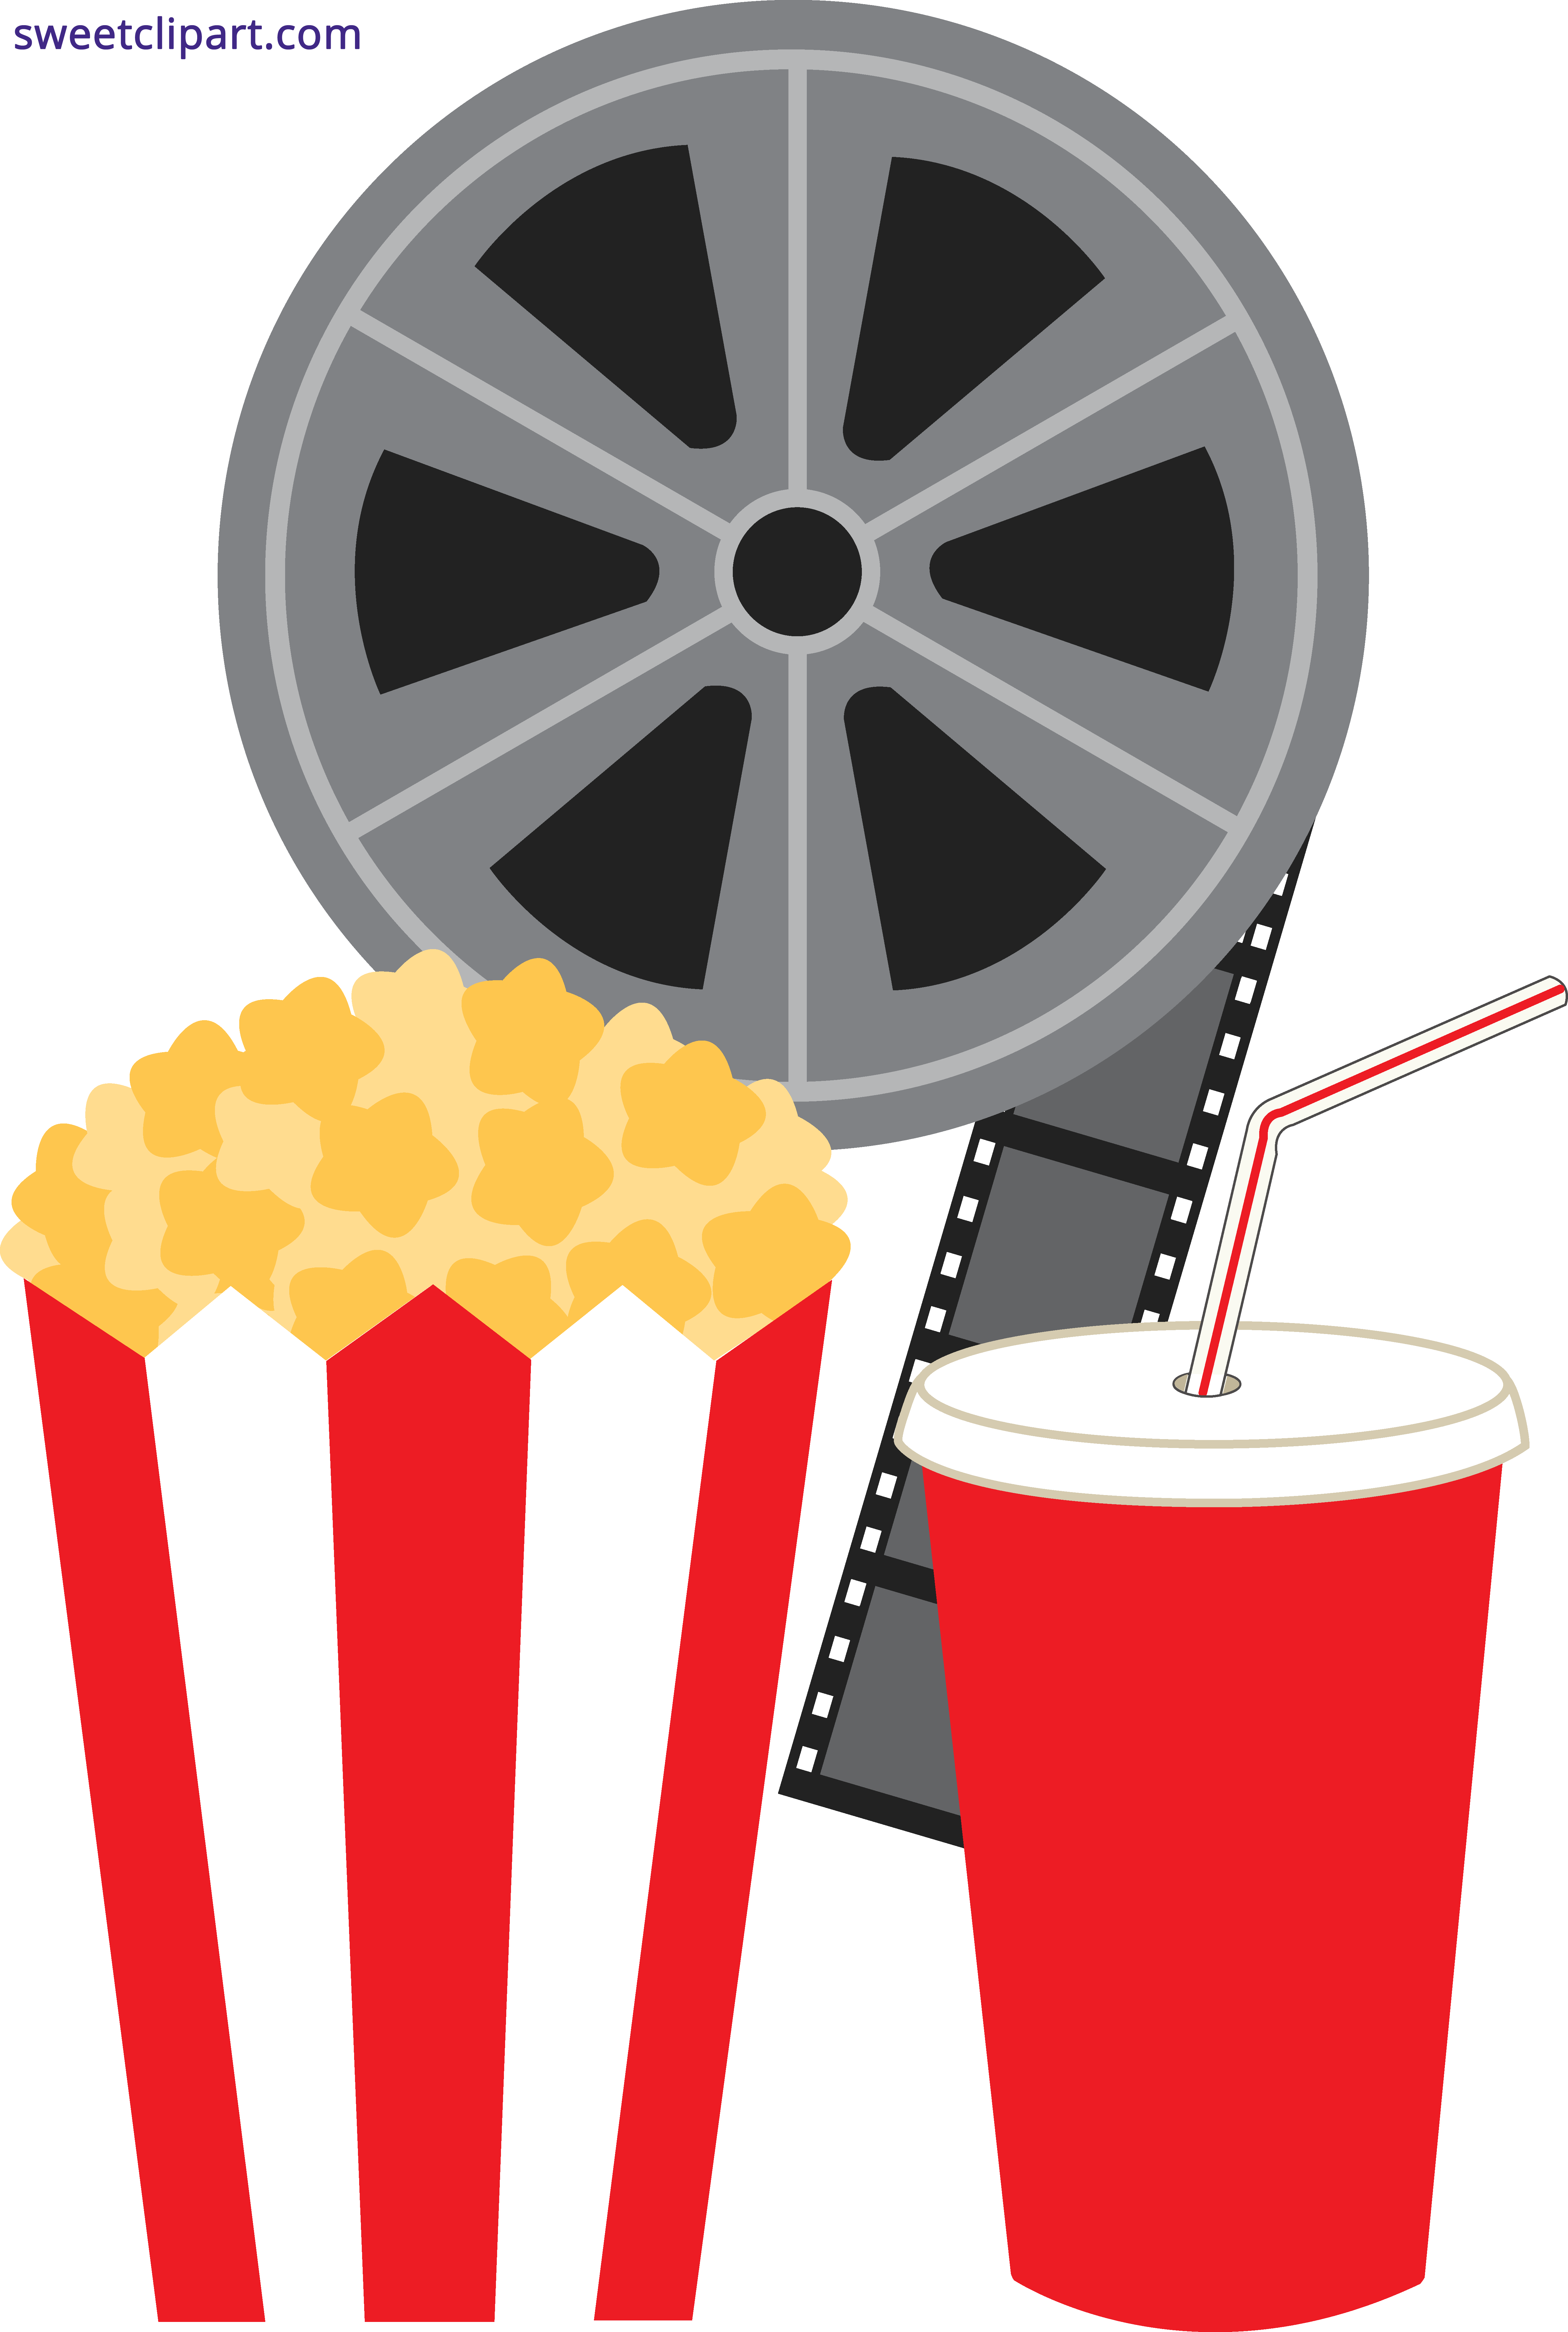 White clipart popcorn. Soda and movie sweet